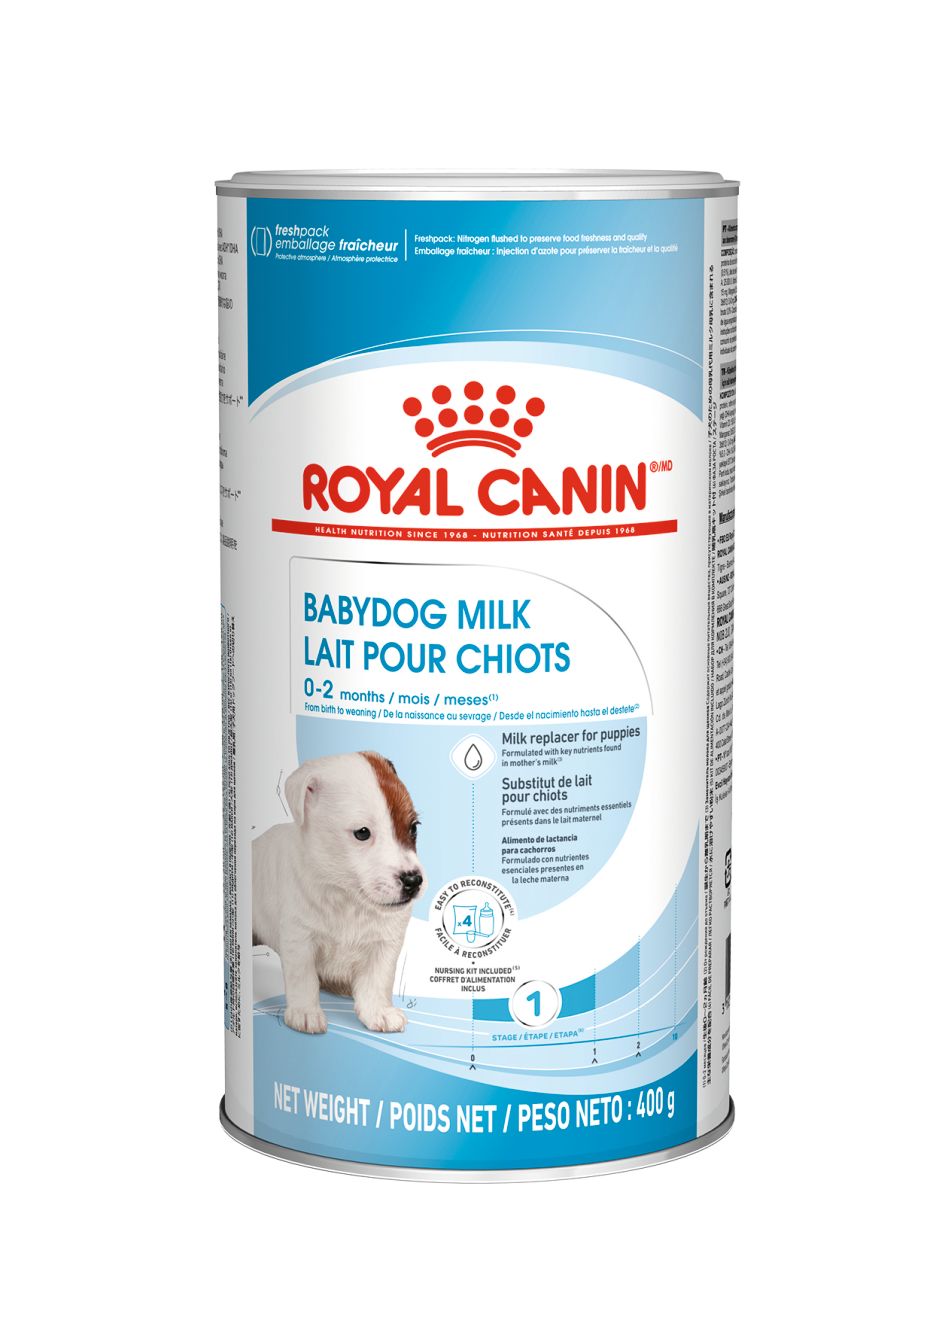 ROYAL CANIN Babydog Milk -  Stage 0 to 2 Months